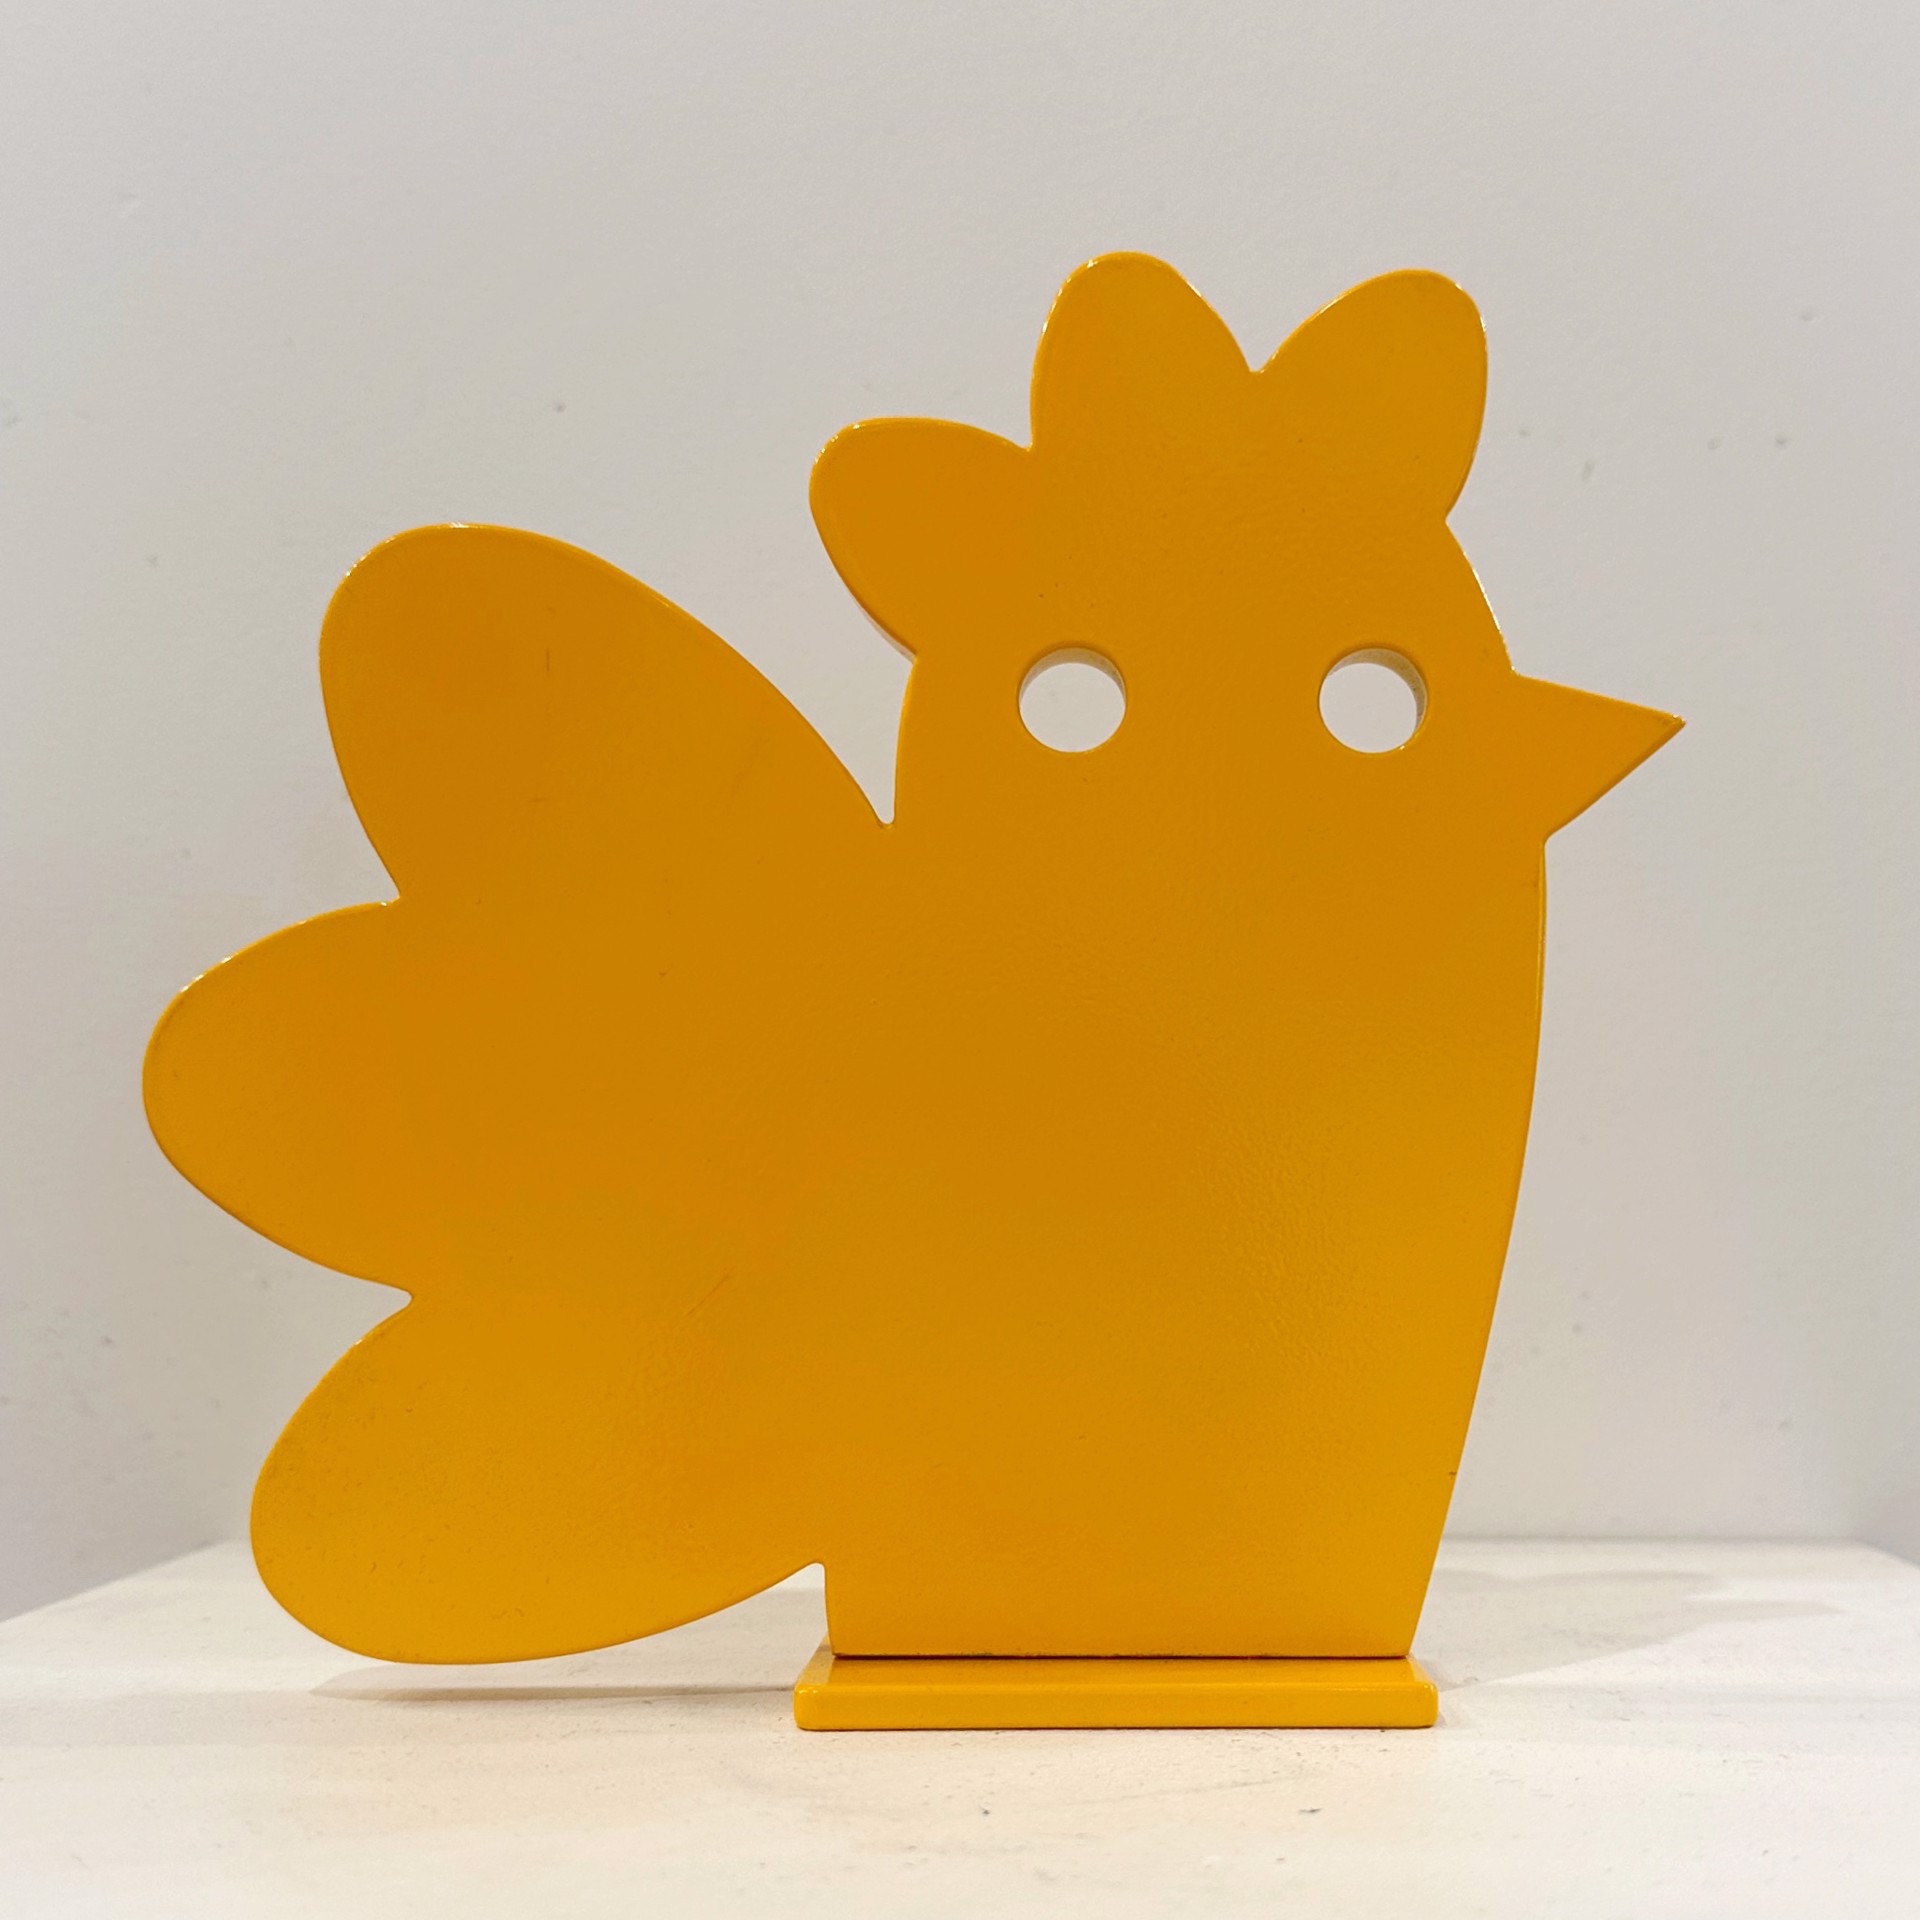 Aluminium Sculpture By Jeffie Brewer Featuring A Chicken In Simplified Shapes And Yellow Finish